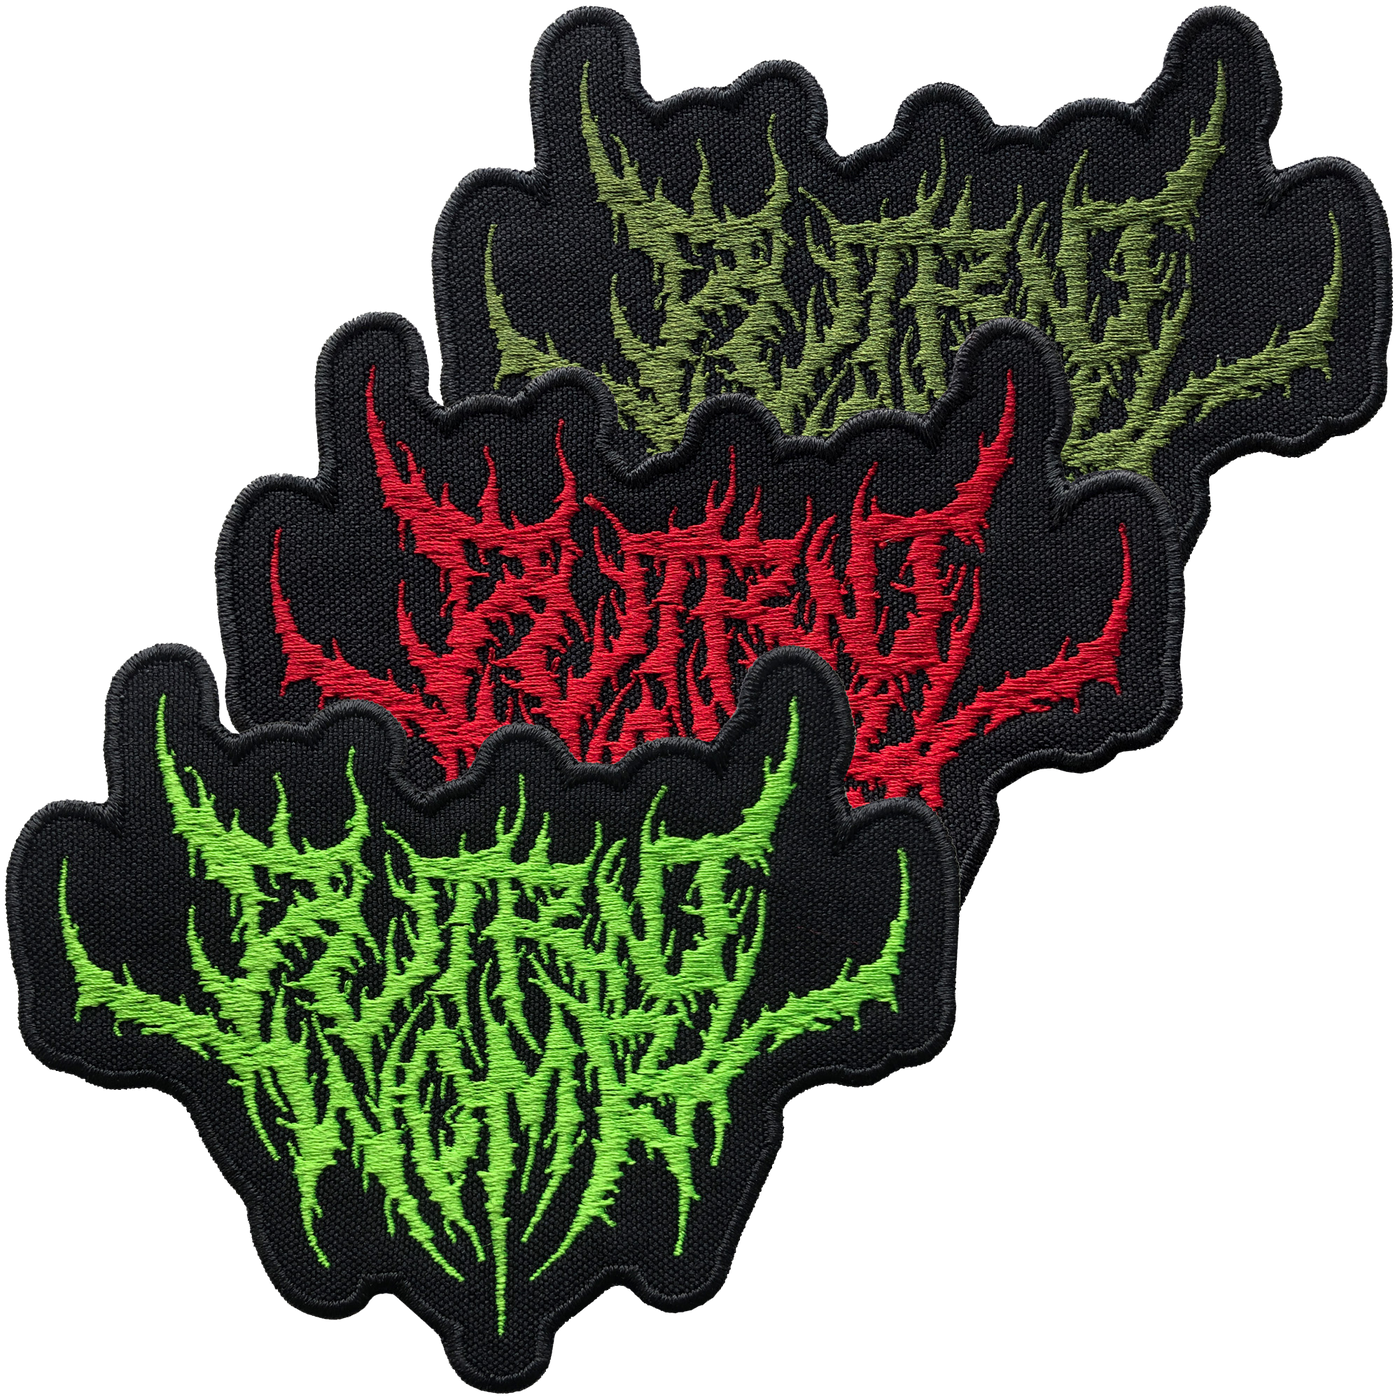 Putrid Womb Patches